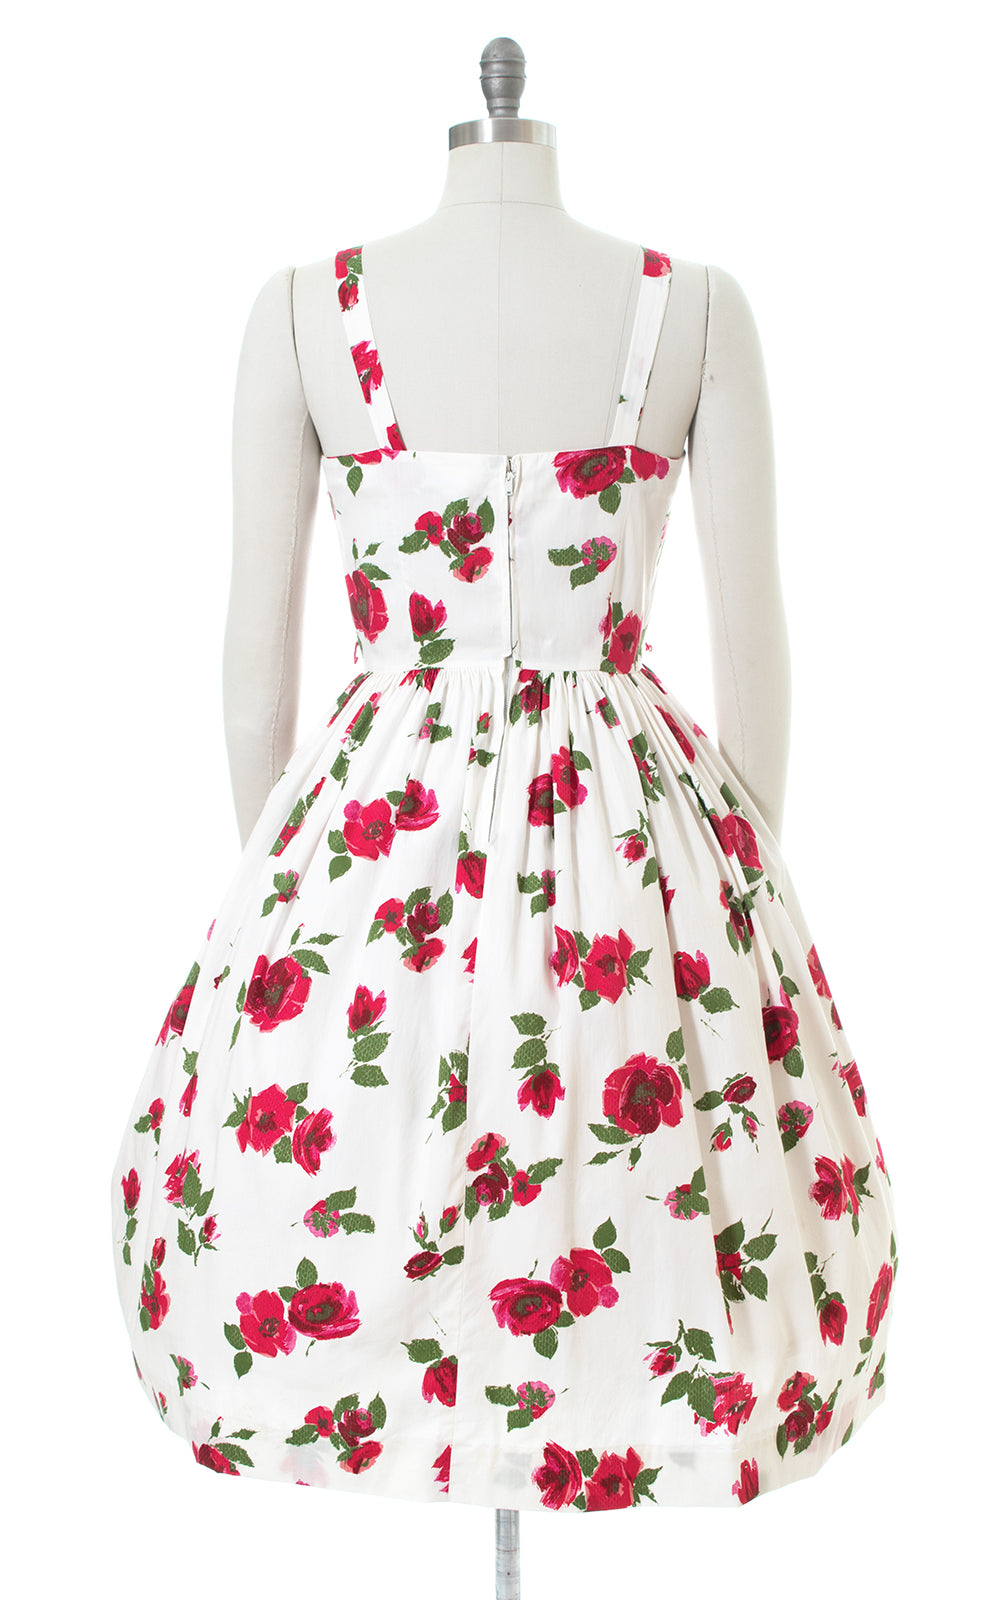 1950s Floral Cotton Hot Pink White Sundress